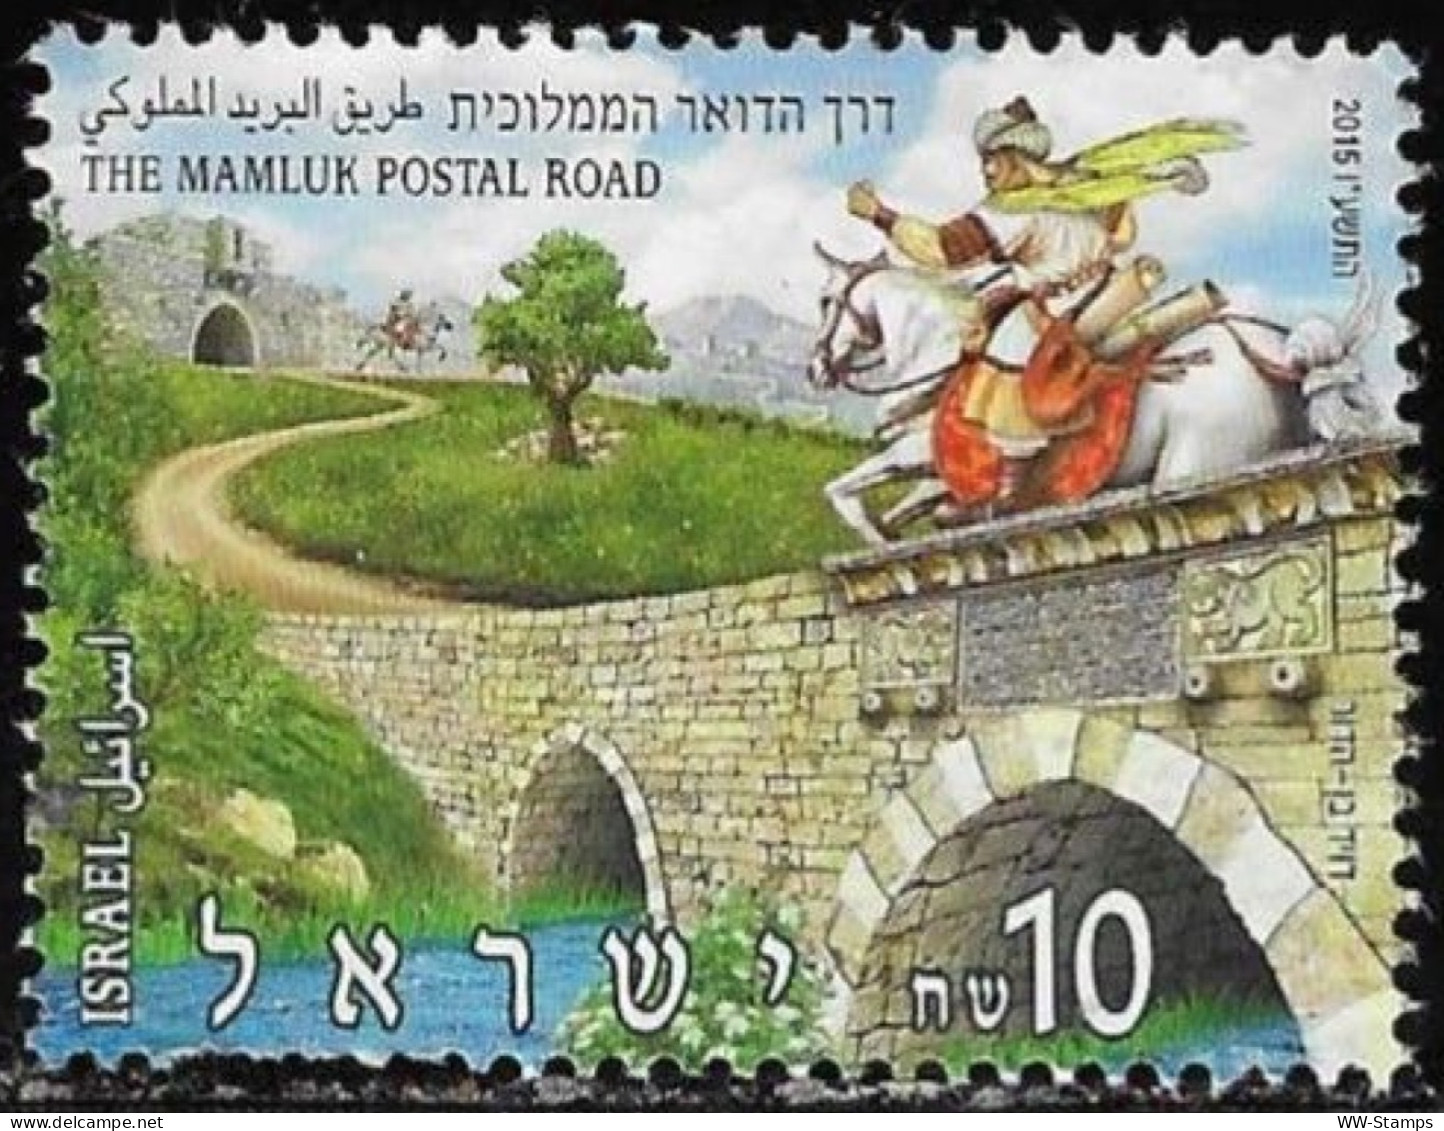 Israel 2015 Used Stamp The Mamluk Postal Road Philately Day [INLT42] - Used Stamps (without Tabs)